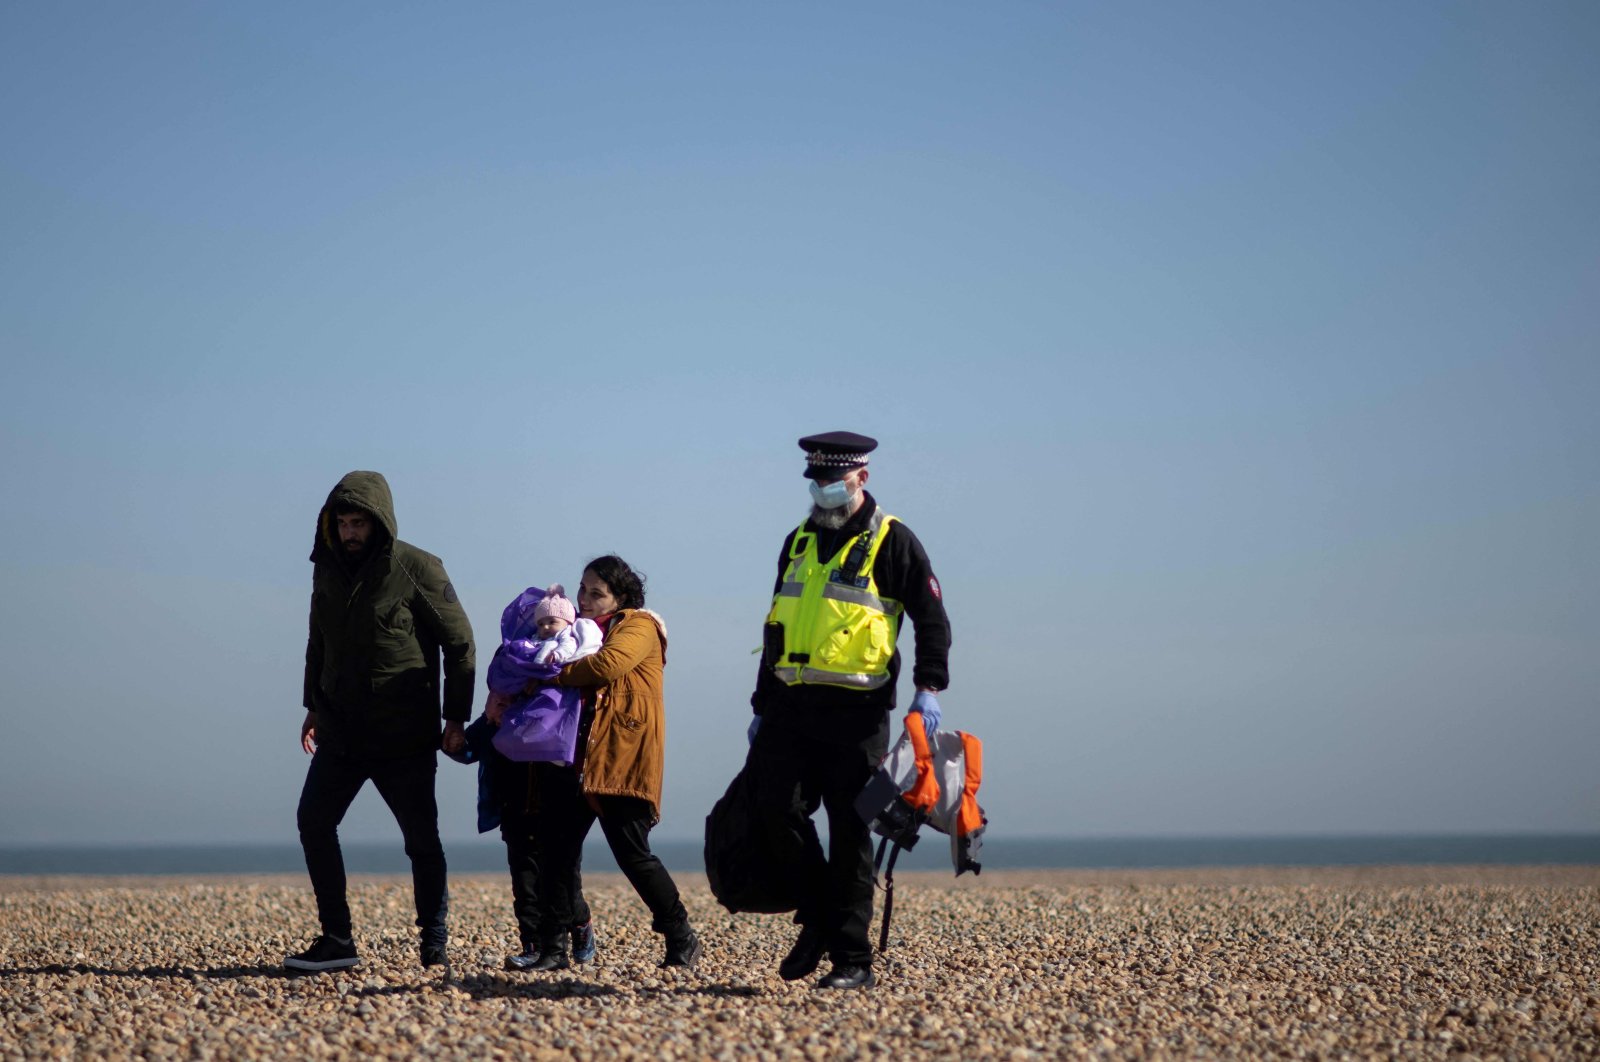 A police officer helps carry the belongings of a migrant family, picked up at sea attempting to cross the English Channel in Dungeness, on the southeast coast of England, U.K., March 15, 2022. (AFP Photo)